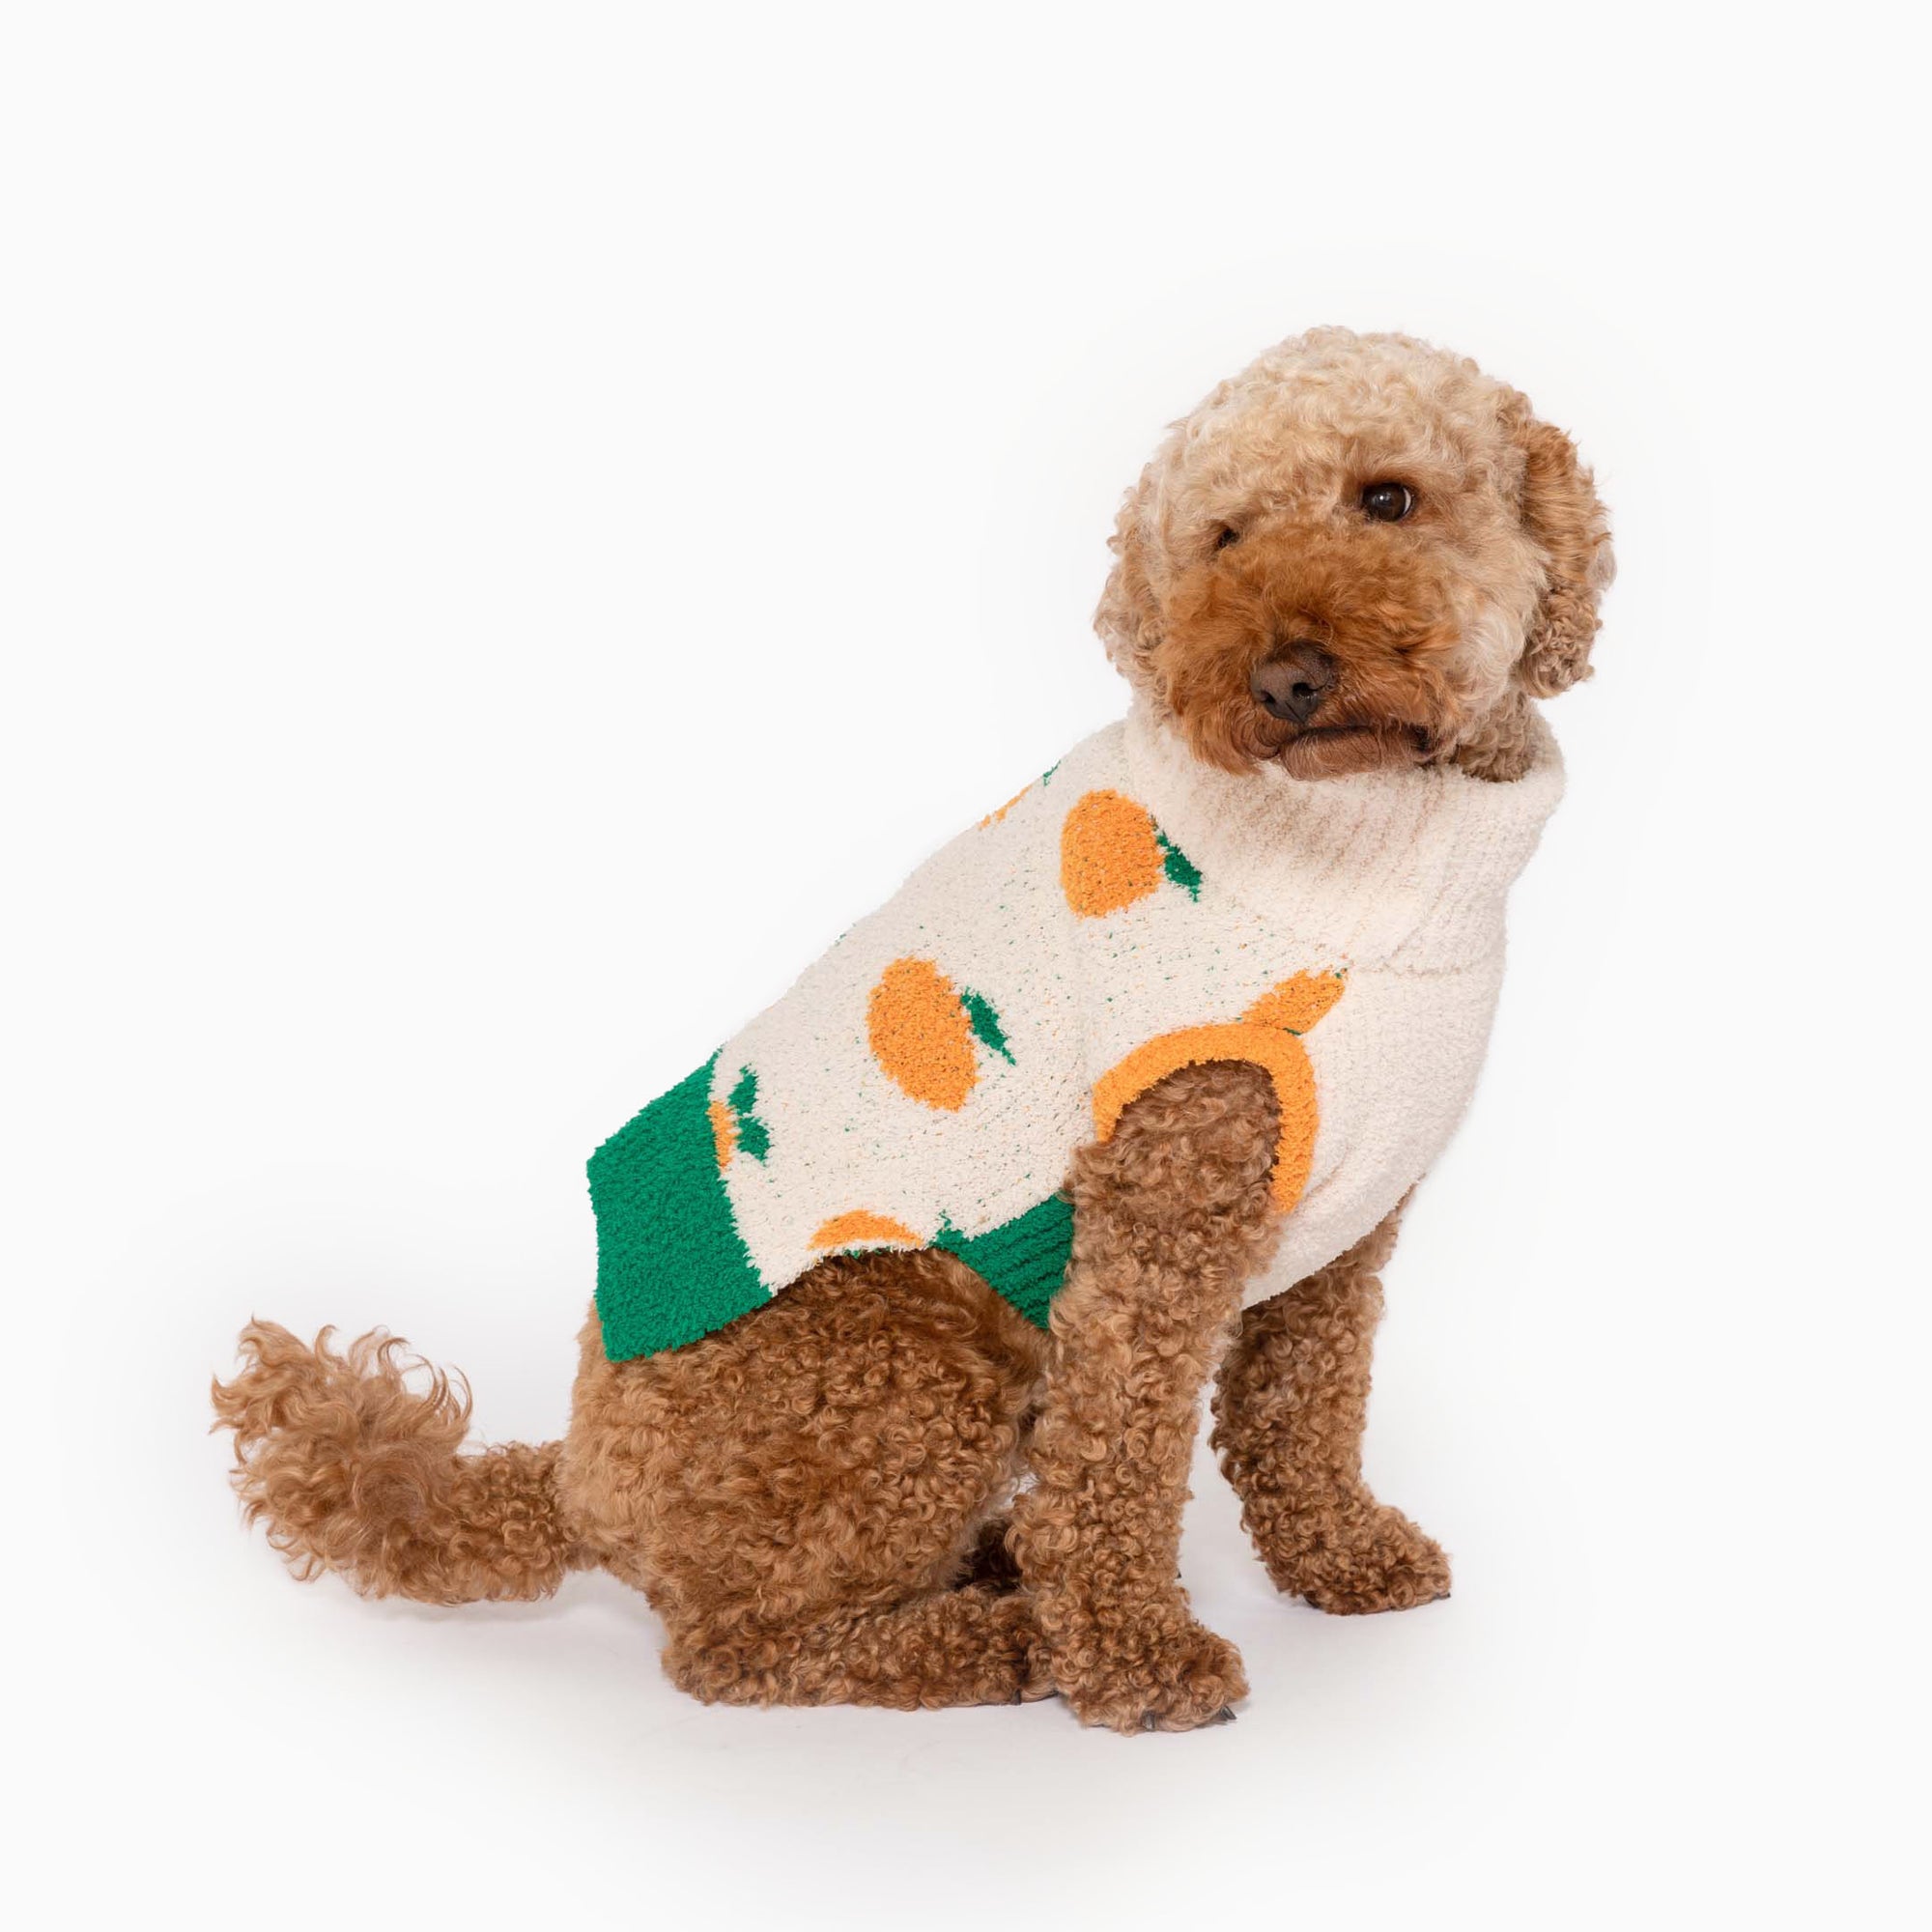 Apricot poodle in "The Furryfolks" cream sweater with orange pattern and green trim, cozy pet fashion.